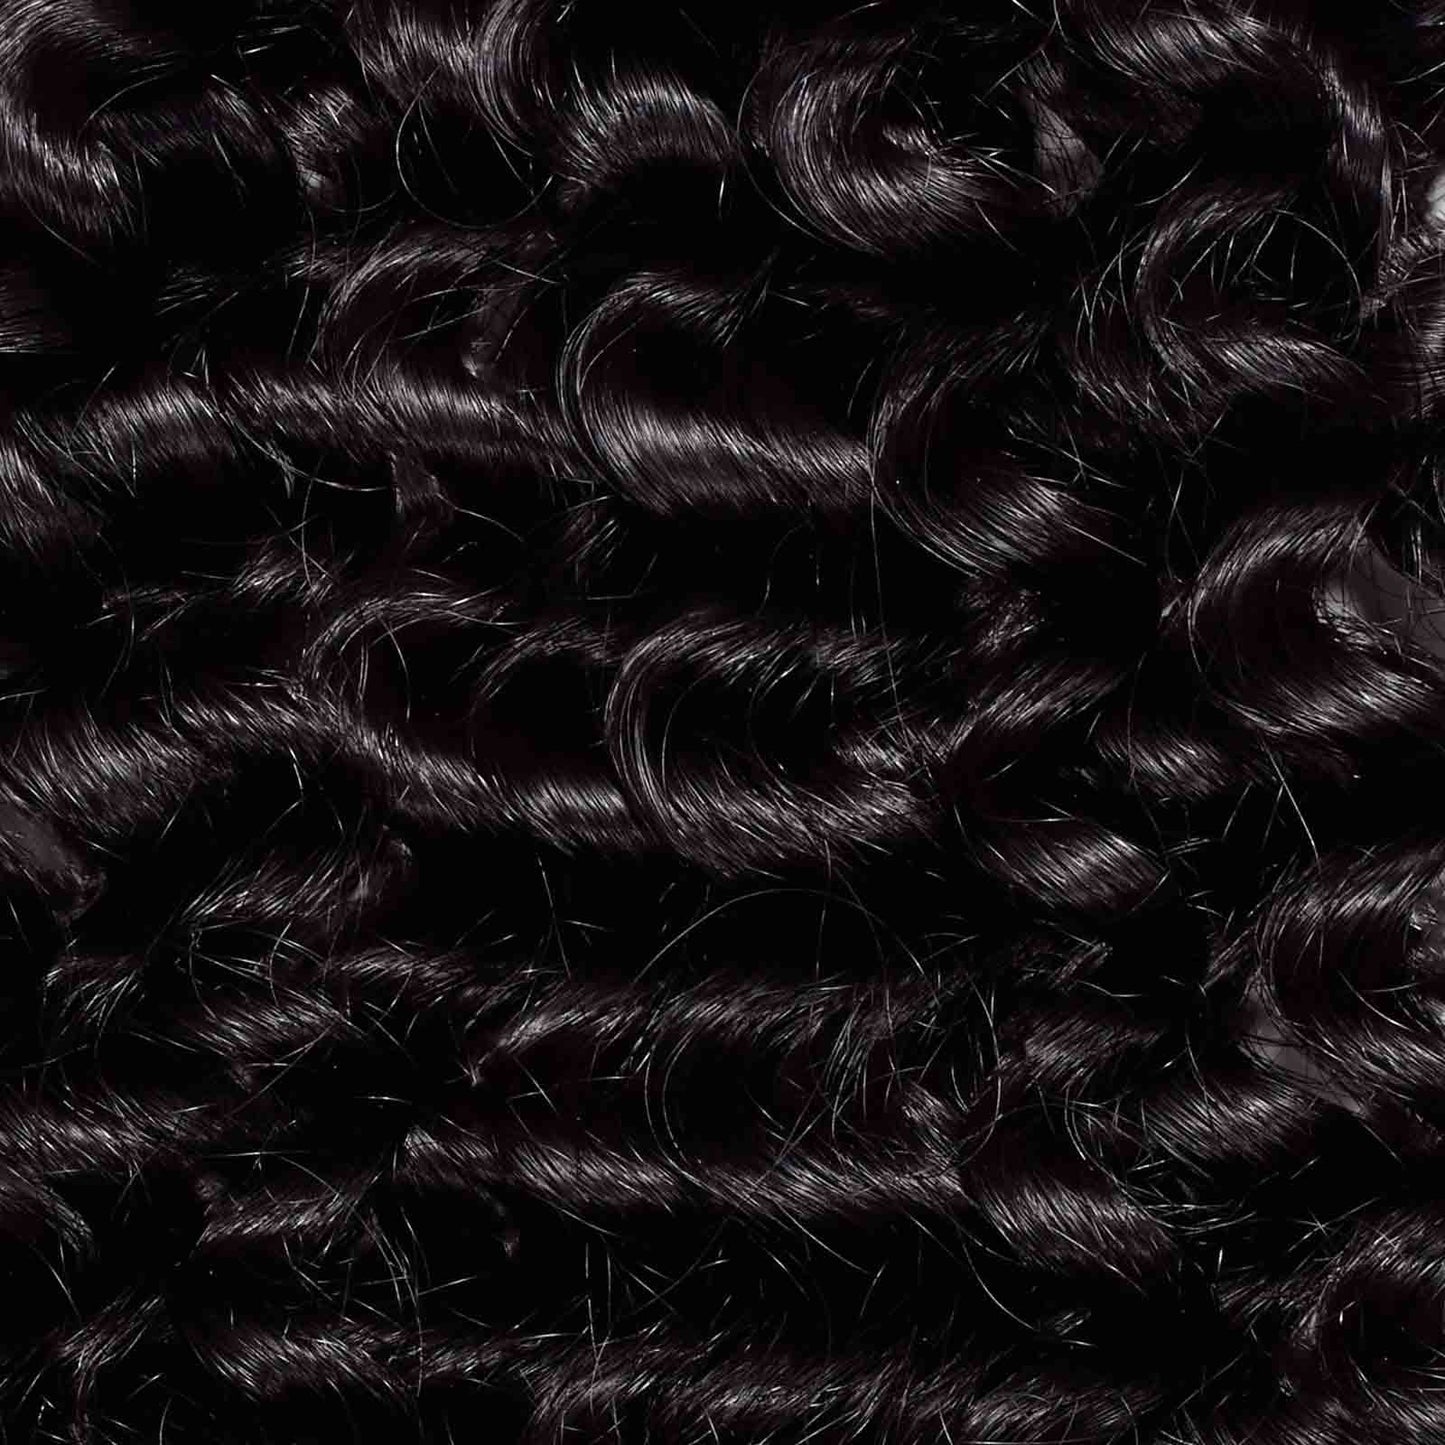 3 x Tight Curly Bundle Deal + Closure